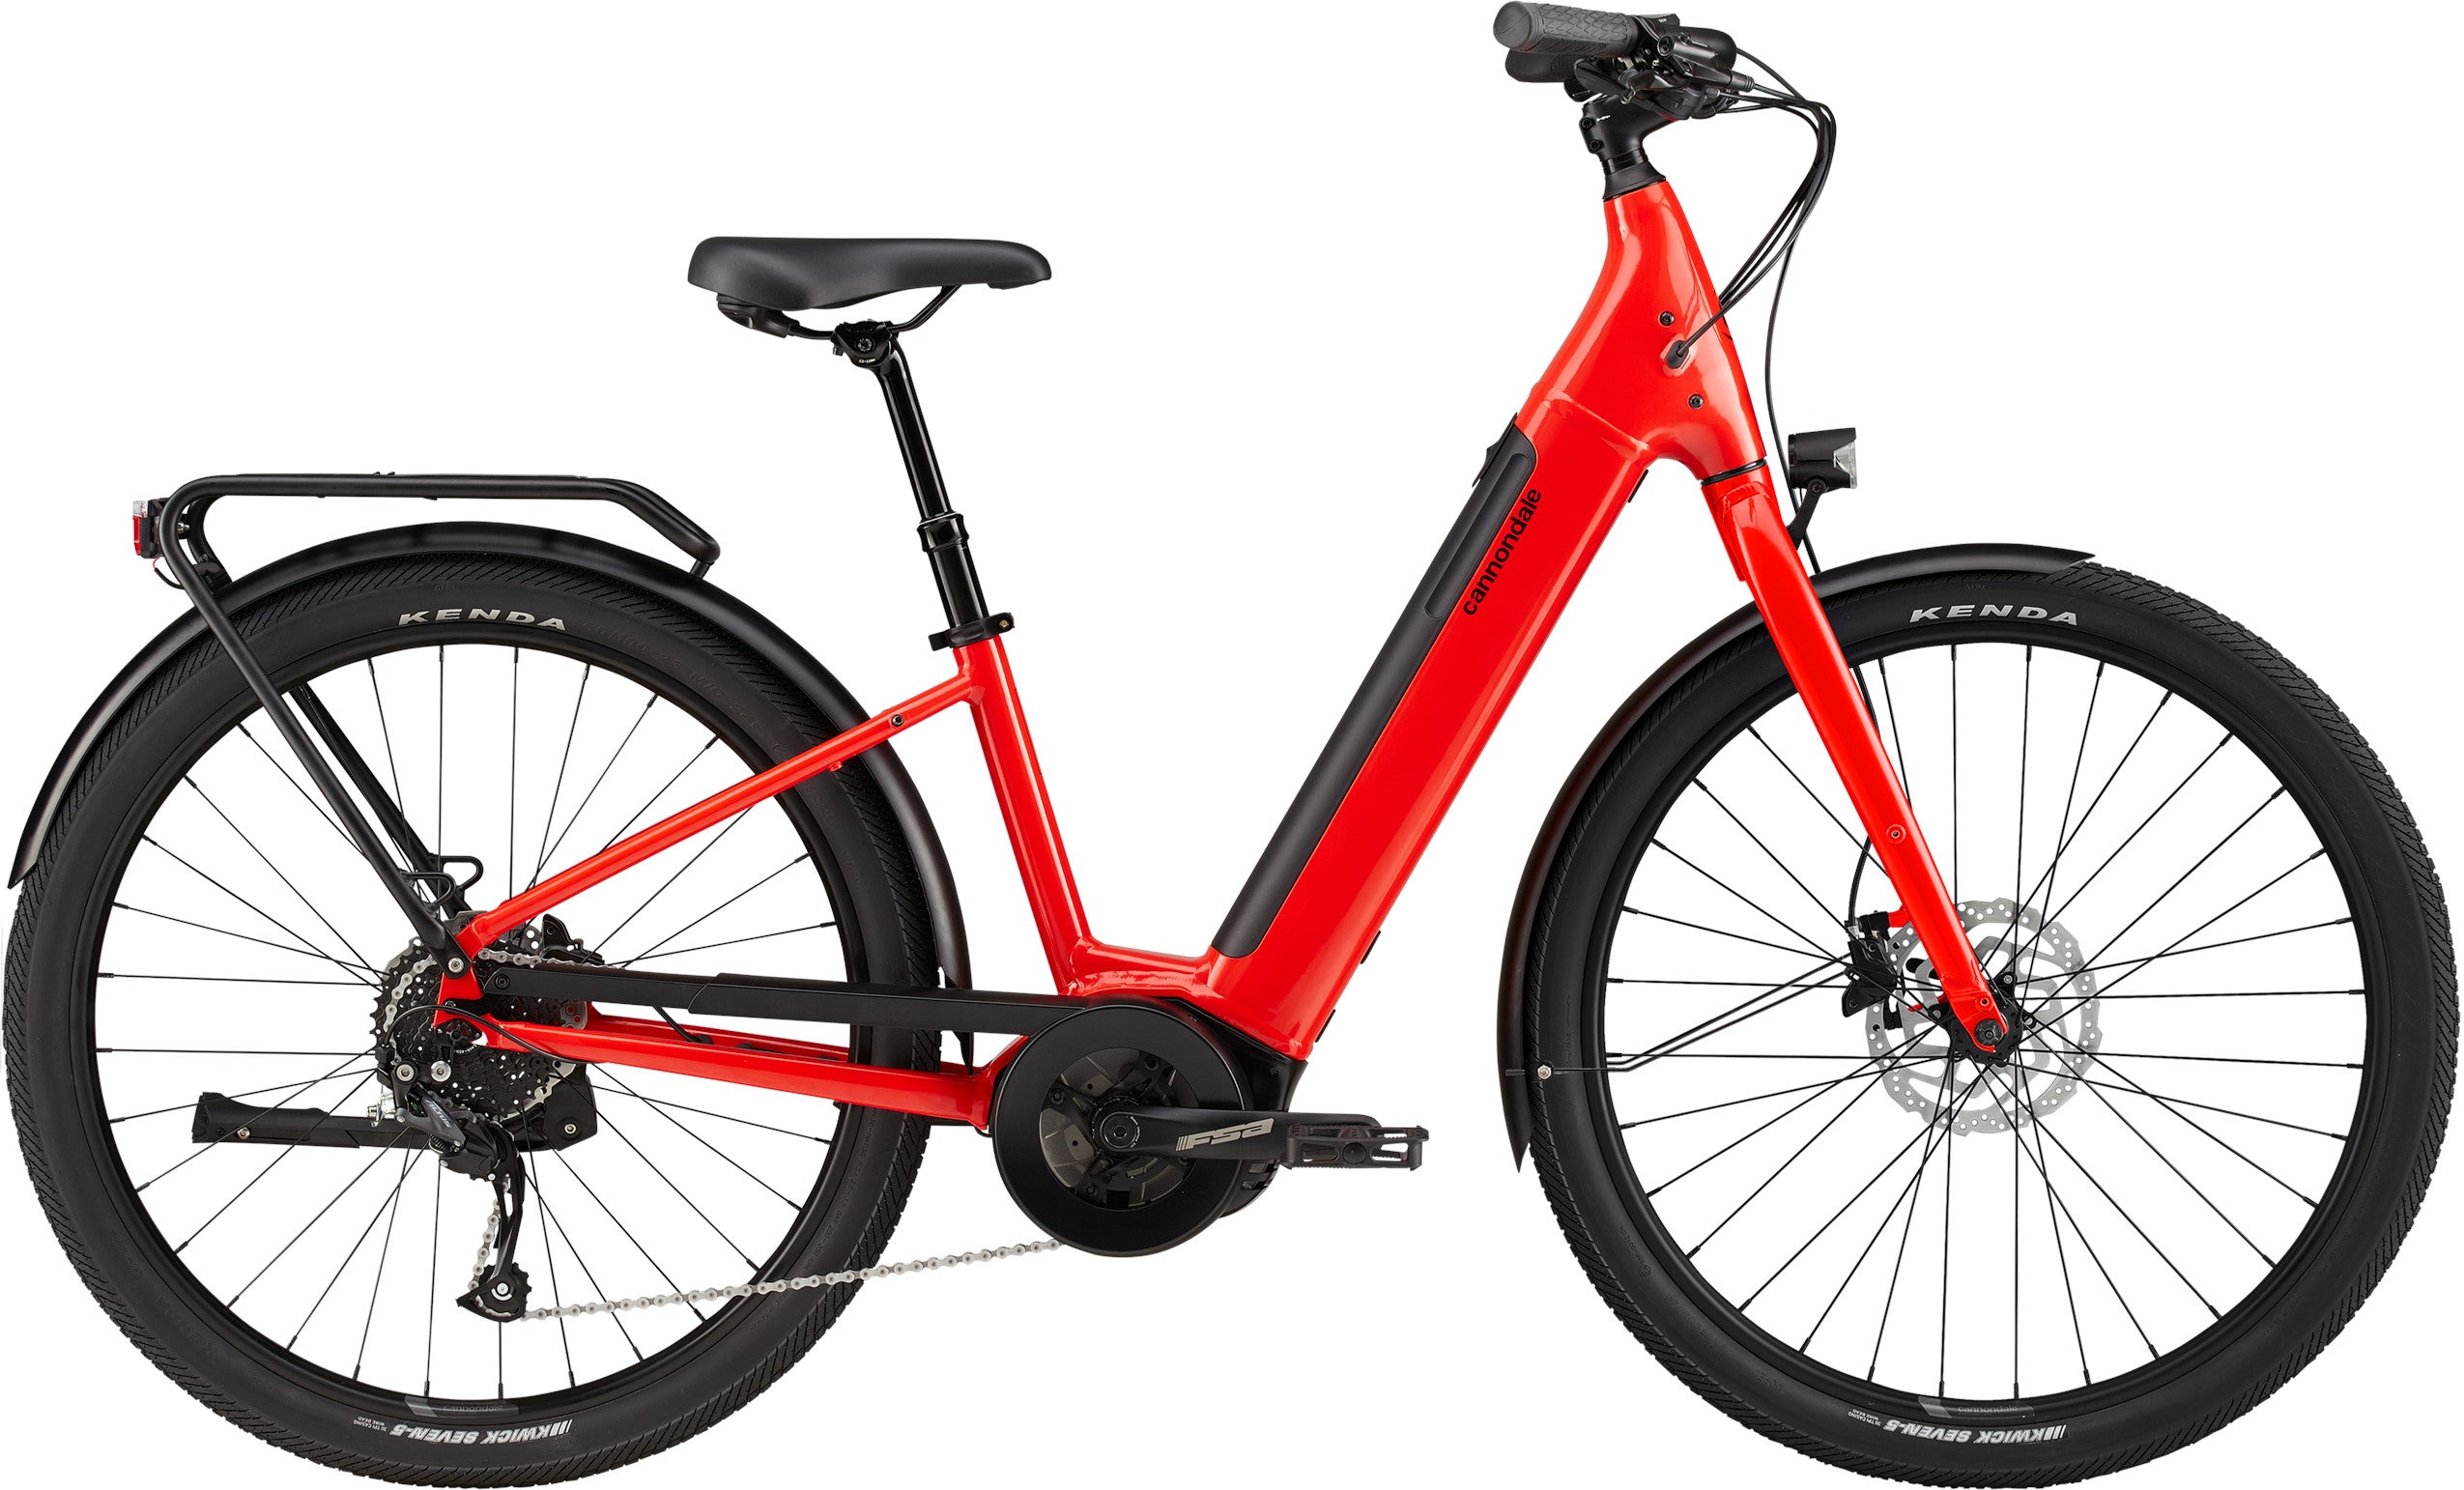 Cannondale Adventure Neo 3.1 EQ Electric Urban Bike - Rally Red